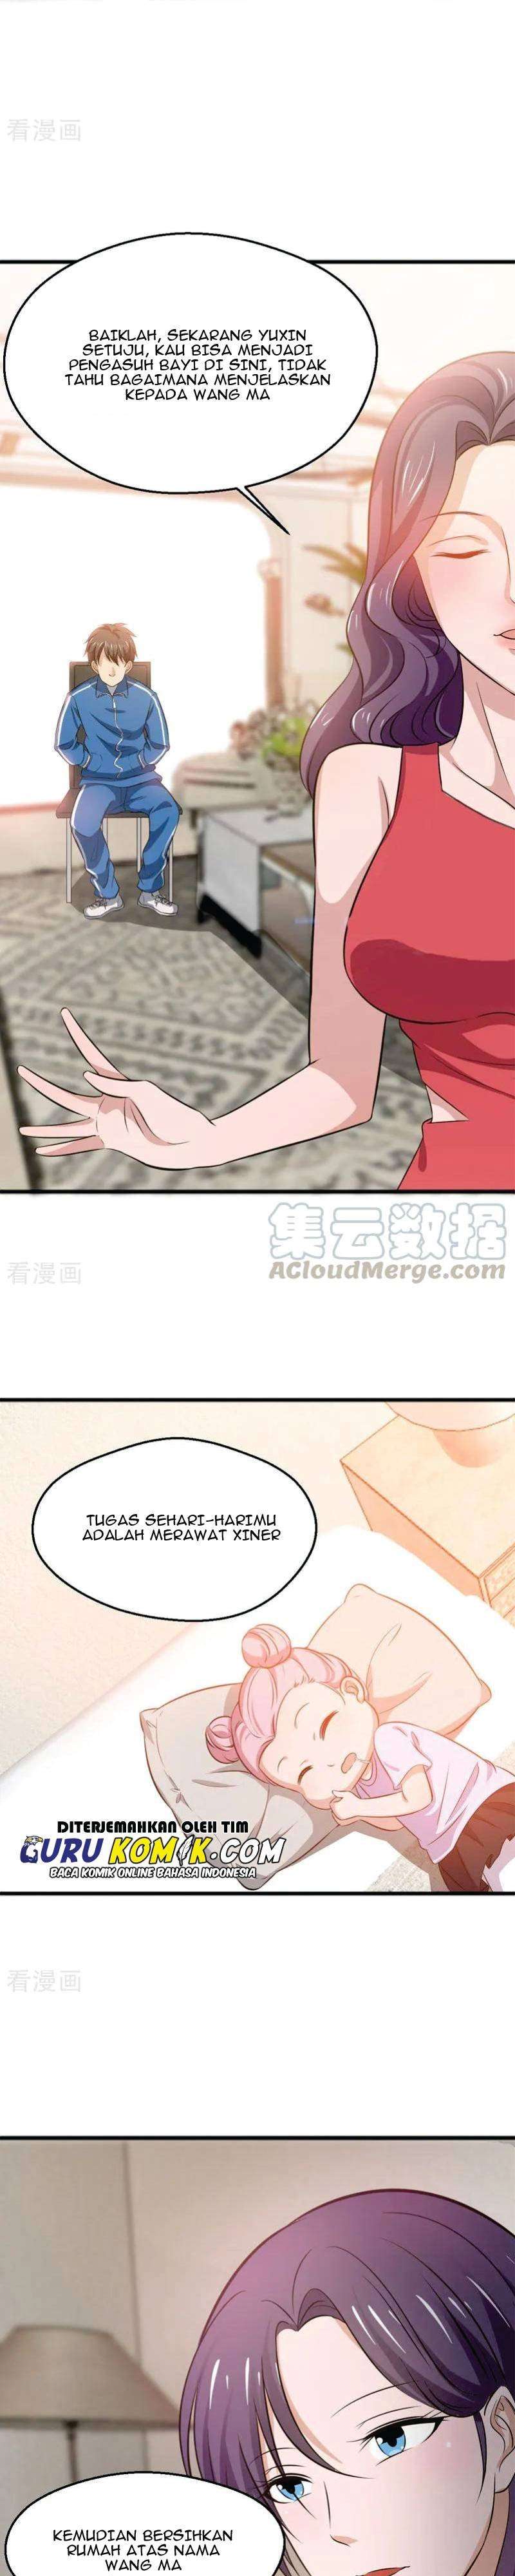 Close Mad Doctor Chapter 24-27 8